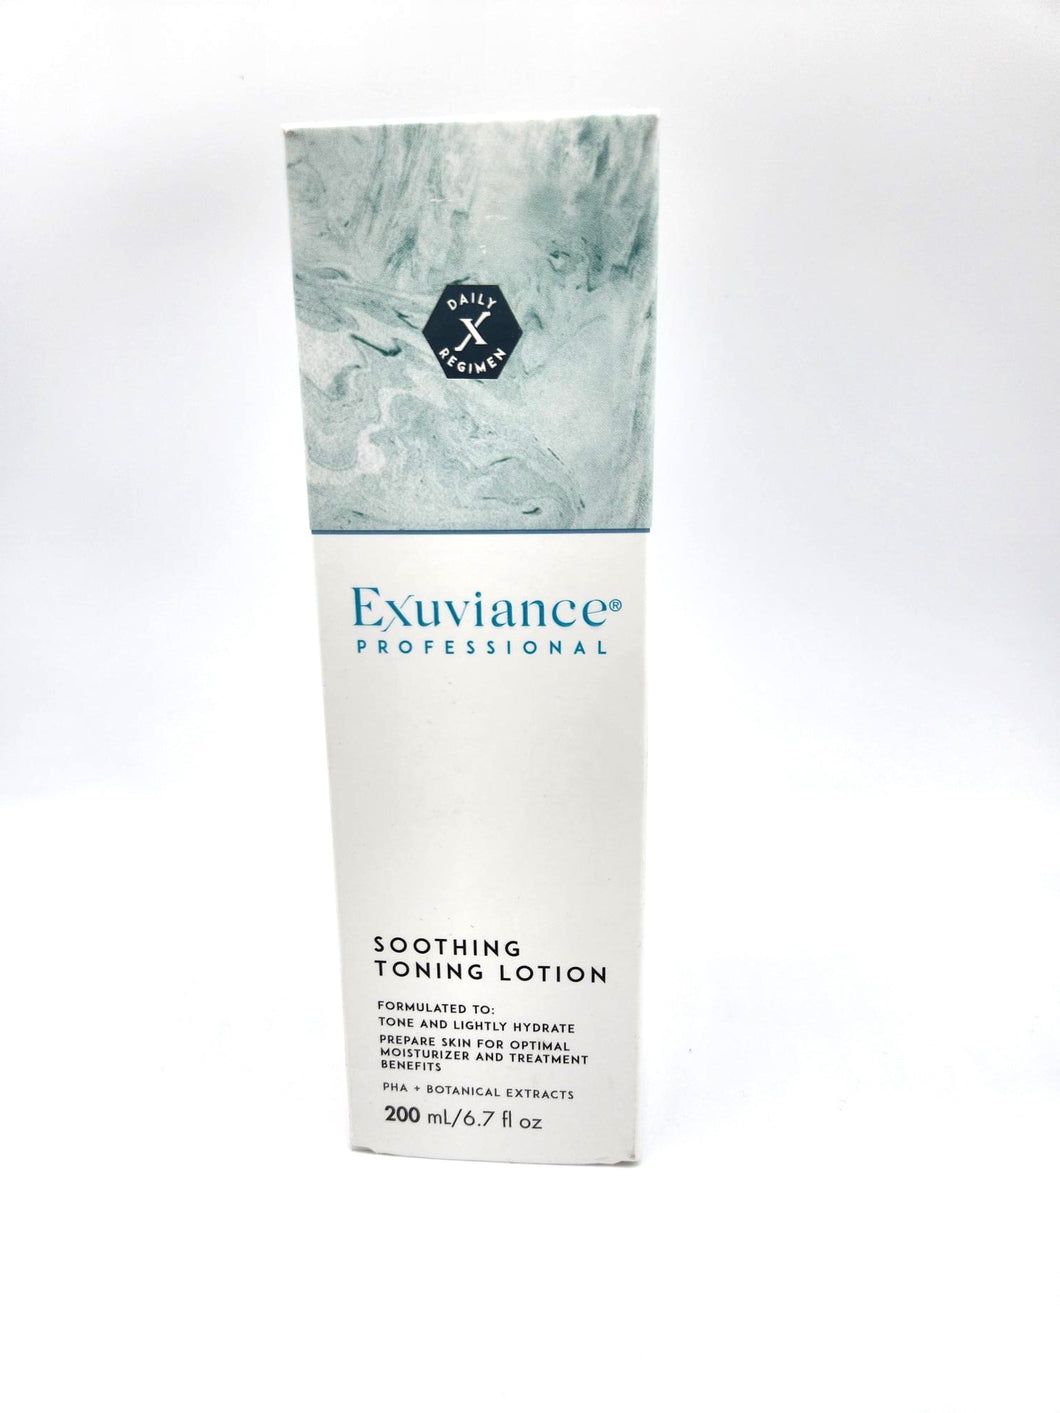 Exuviance Professional Soothing Toning Lotion - 200 mL